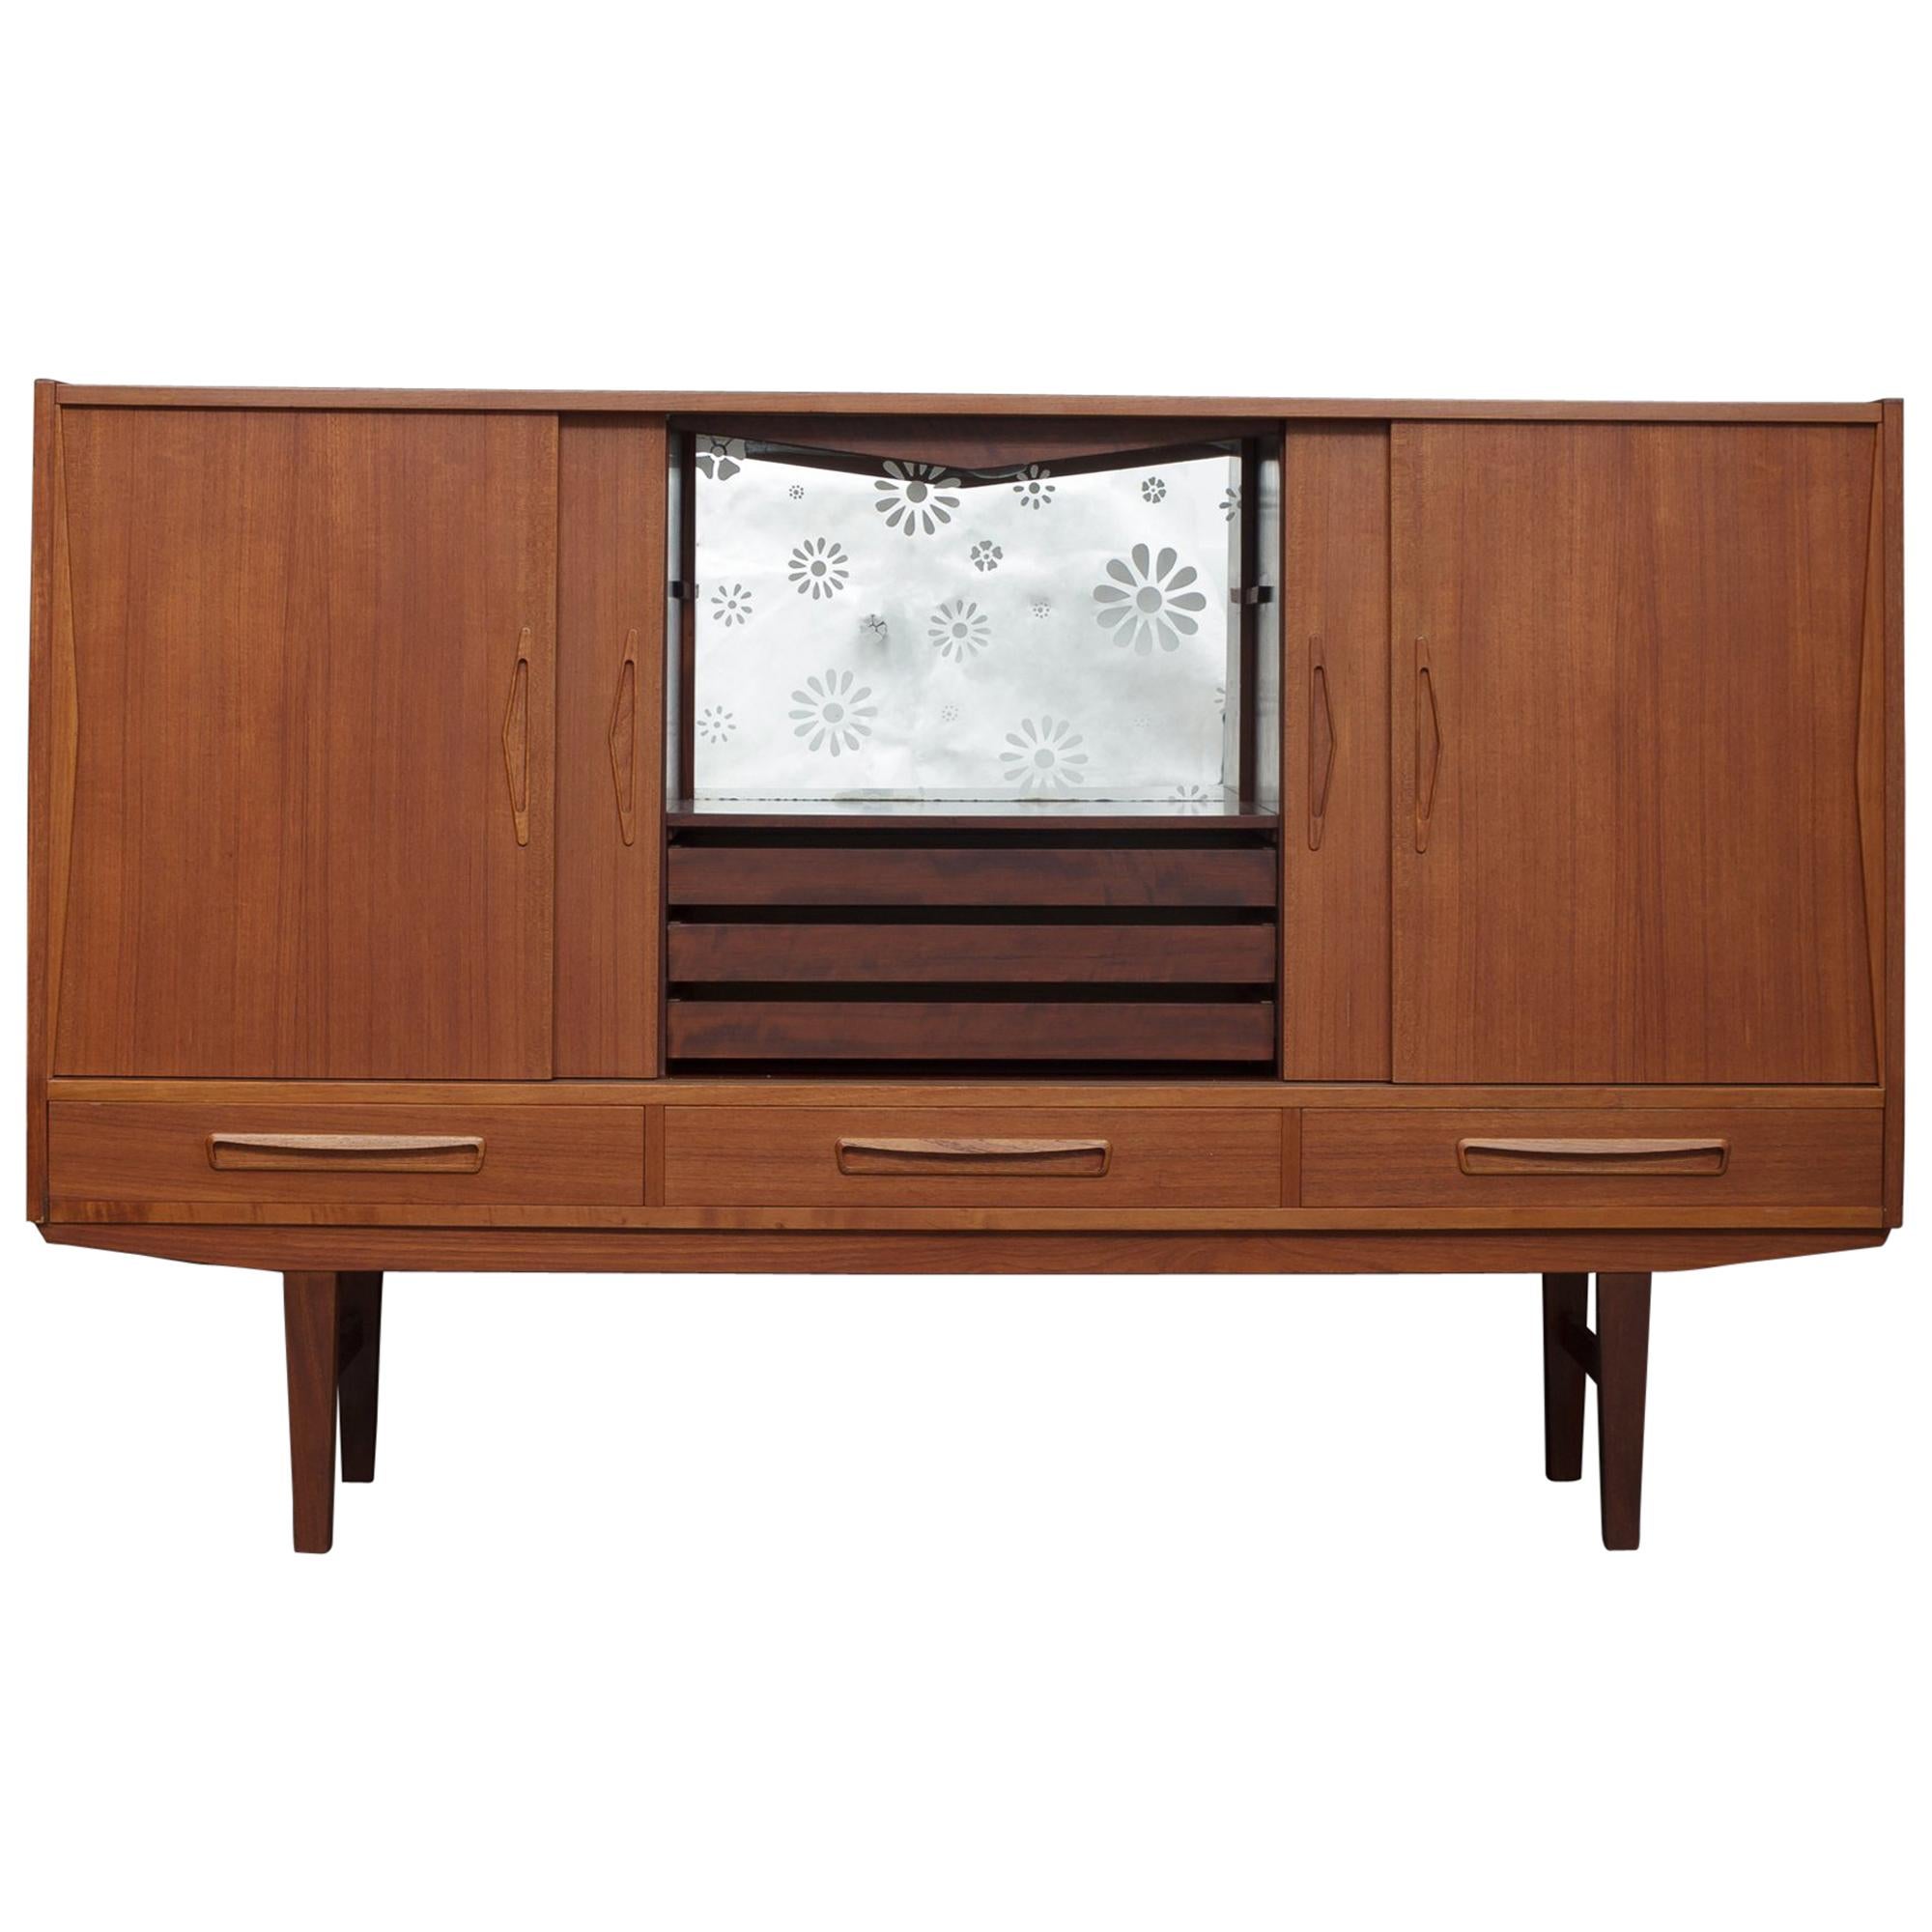 Danish Teak Highboard with a Lighted Bar from 1960s For Sale